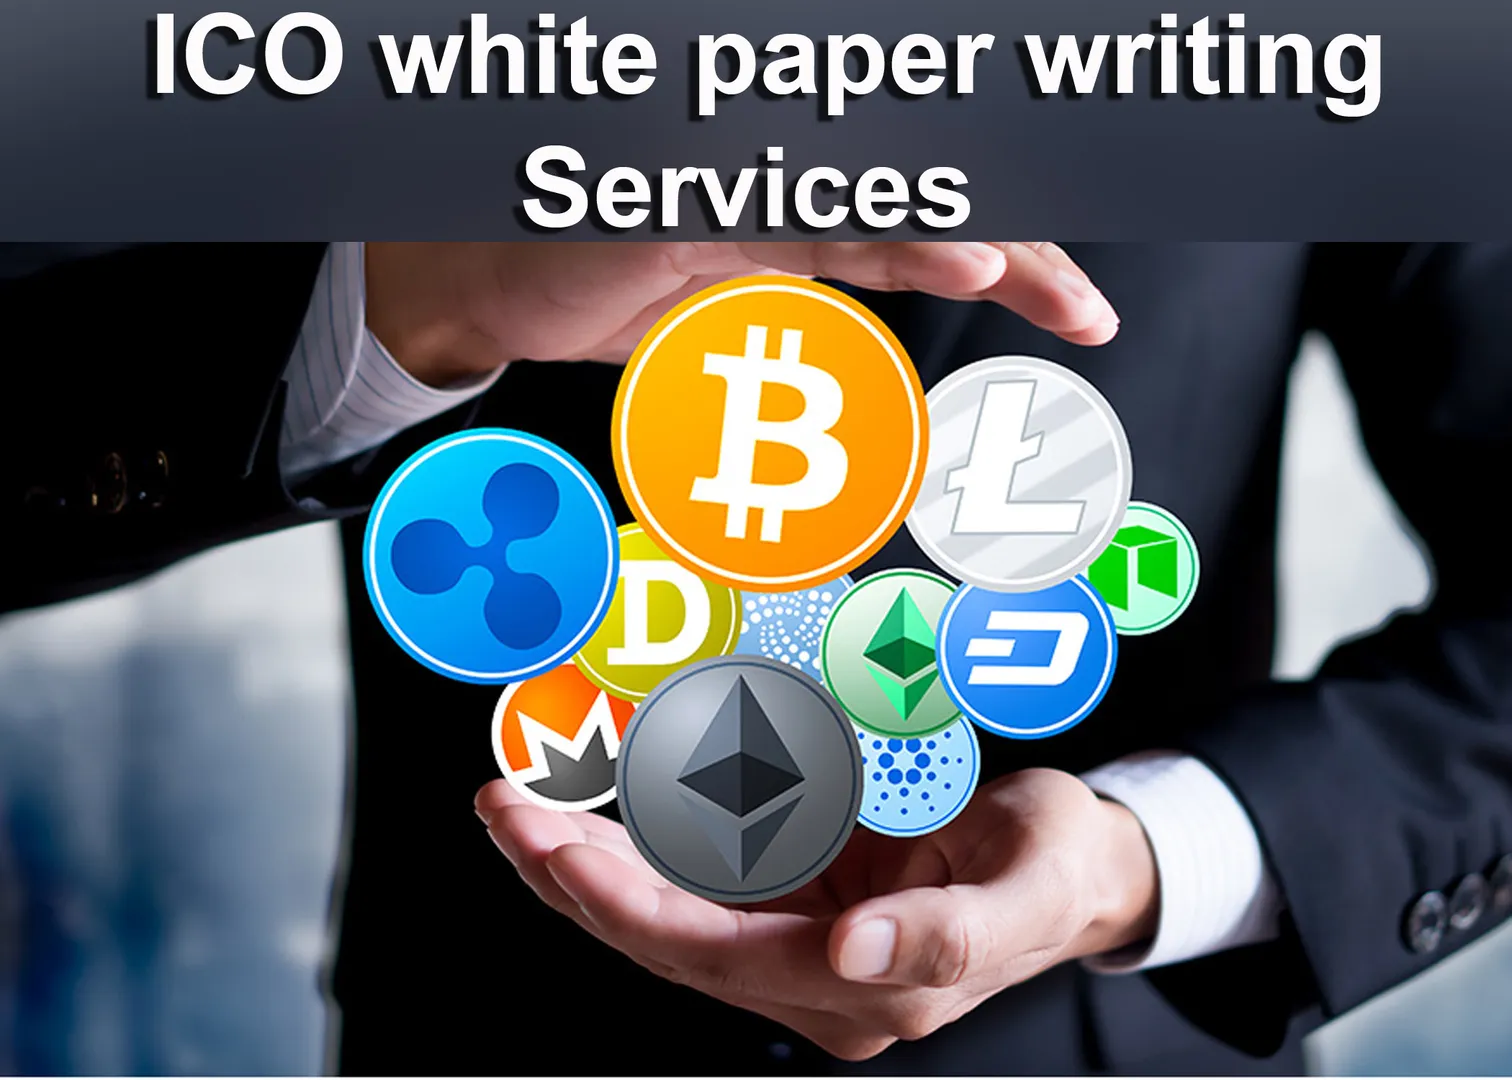 Are you in need of an expert white paper writer for your project?   I will write a well-researched, goal-oriented white paper with adequate illustrations and design. I have an in-depth knowledge of how blockchain technology and cryptocurrency work and vast experience with working on solana, polygon, ethereum and other blockchain tech. I’m professional at handling the tokenomics aspect of blockchain based projects. I can do paper writing on NFT white paper, crypto gaming, Metaverse, Initial Coin Offering, and IDO white papers. 

You can contact me on

https://www.upwork.com/freelancers/~017c68df6a07c7fc2e

#CryptoProjects
#BlockchainTech
#CryptoInnovation
#BlockchainRevolution
#Decentralization
#CryptoCommunity
#CryptoNews
#BlockchainSolutions
#SmartContracts
#CryptoDevelopers
#BlockchainDevelopment
#DigitalCurrency
#CryptoInvesting
#Altcoins
#DeFi (Decentralized Finance)
#CryptoTrading
#NFTs (Non-Fungible Tokens)
#BlockchainUseCases
#CryptoStartups
#BlockchainExplained